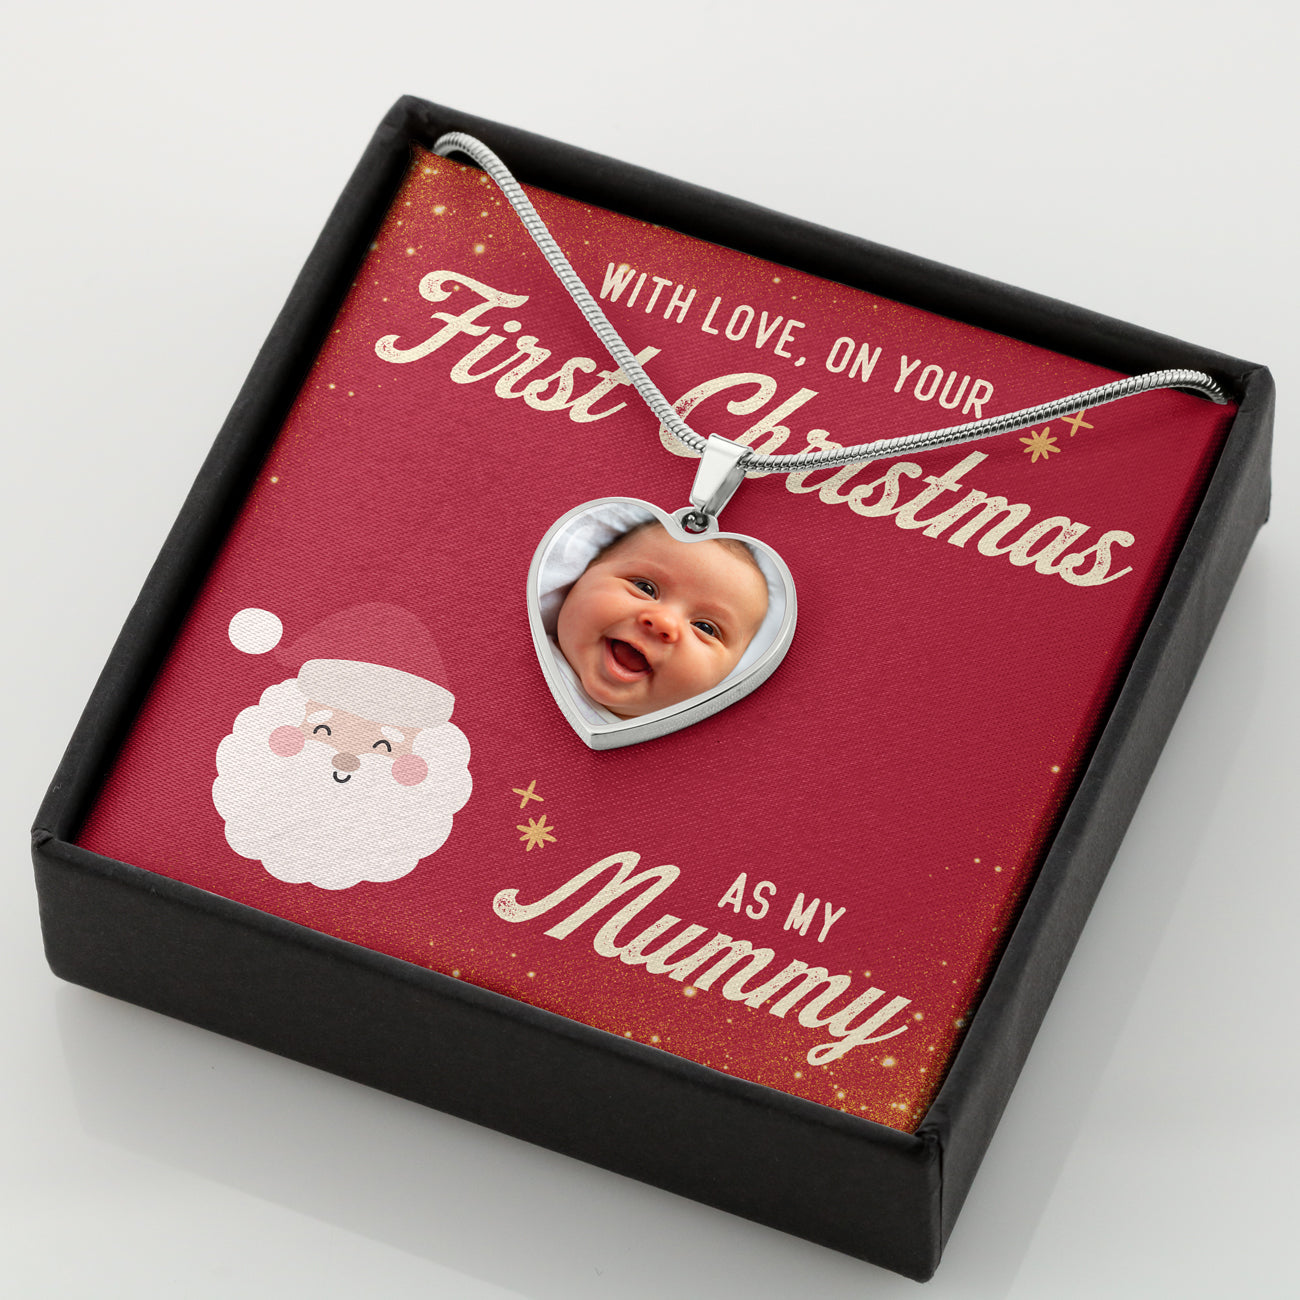 With Love, On Your First Christmas as My Mummy Personalized Photo Necklace (with box)